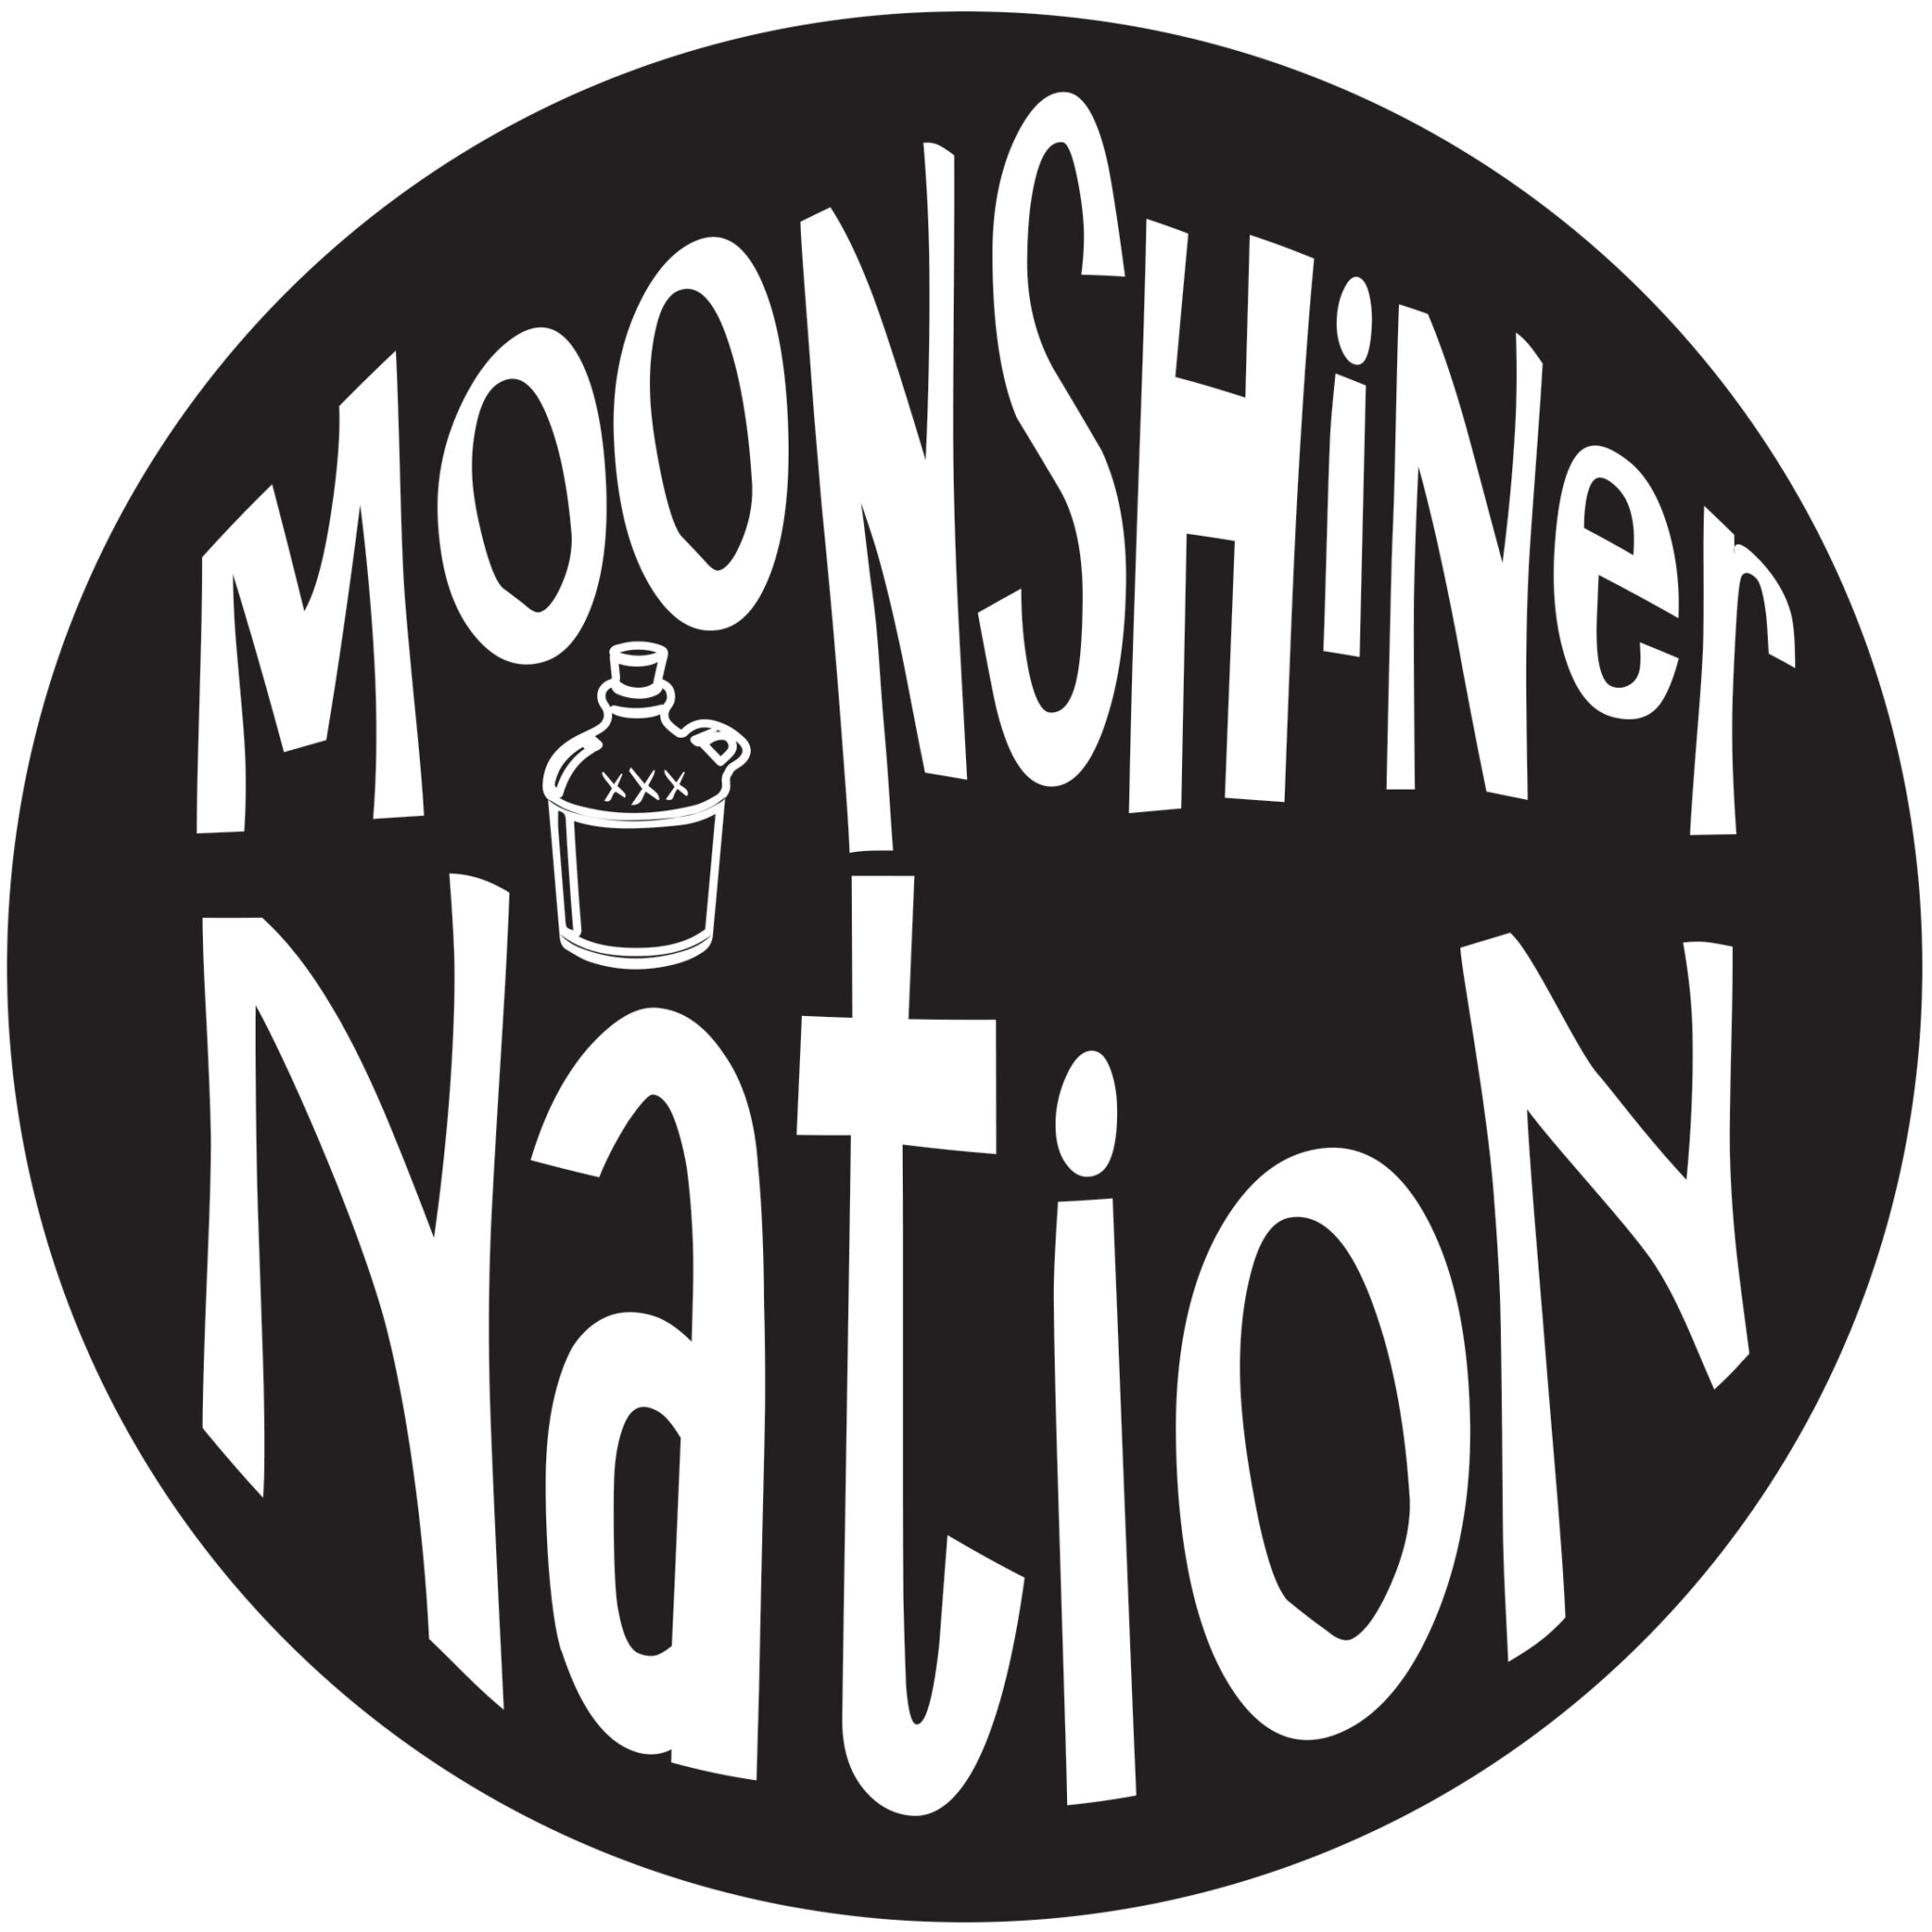 Moonshiner Nation Russ Still and The Moonshiners